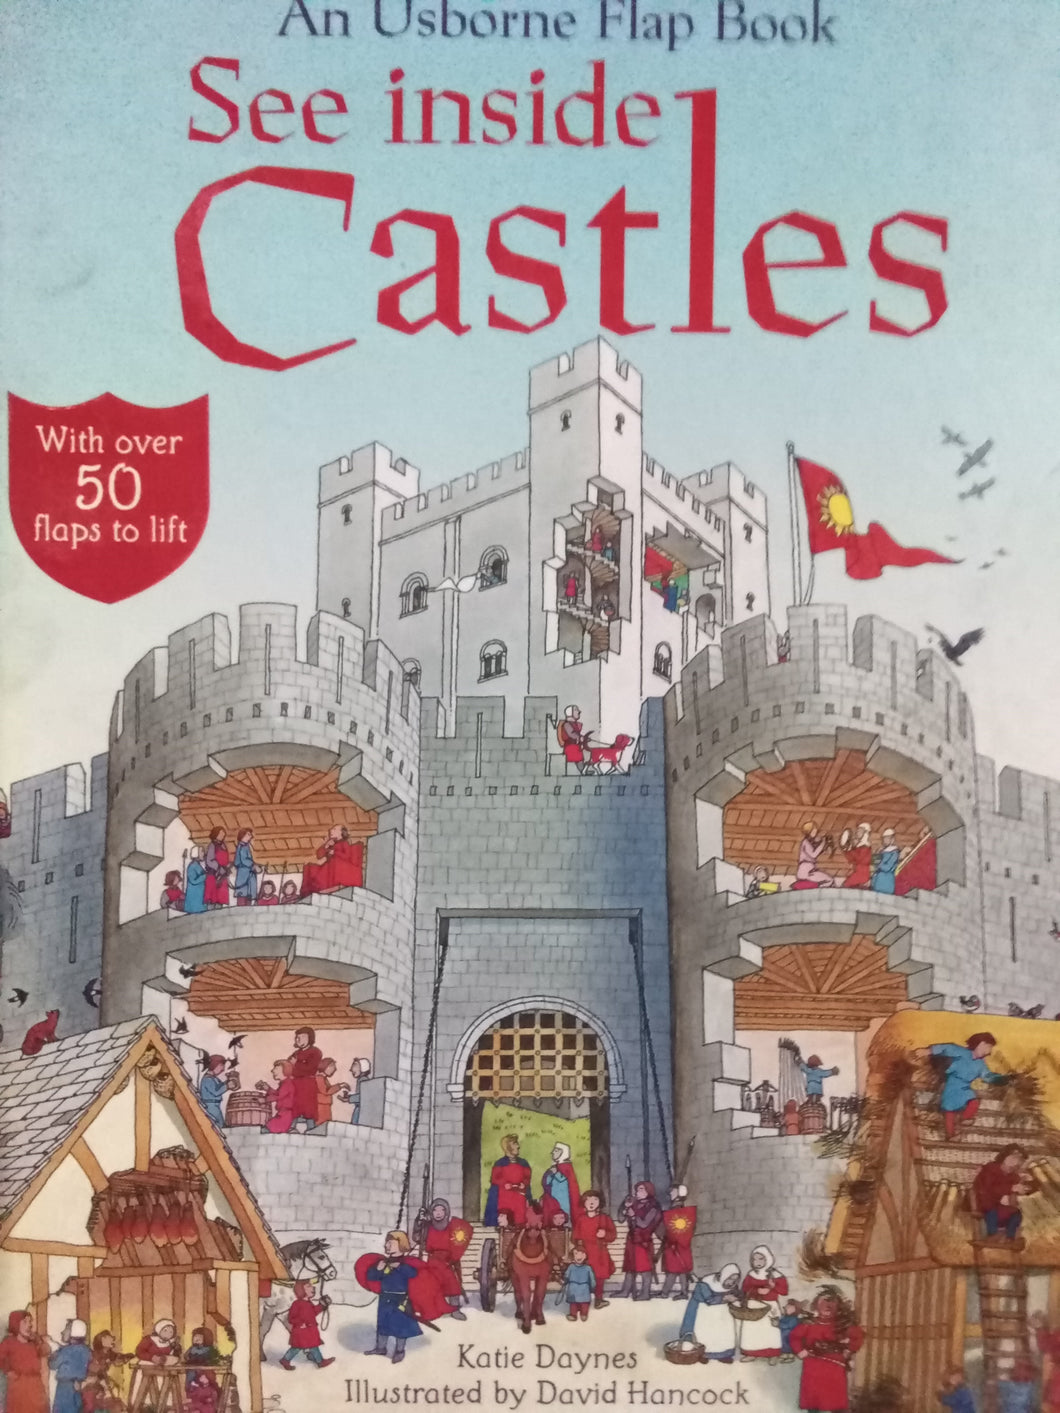 An Usborne Flap Book See Inside Castles by Katie Daynes